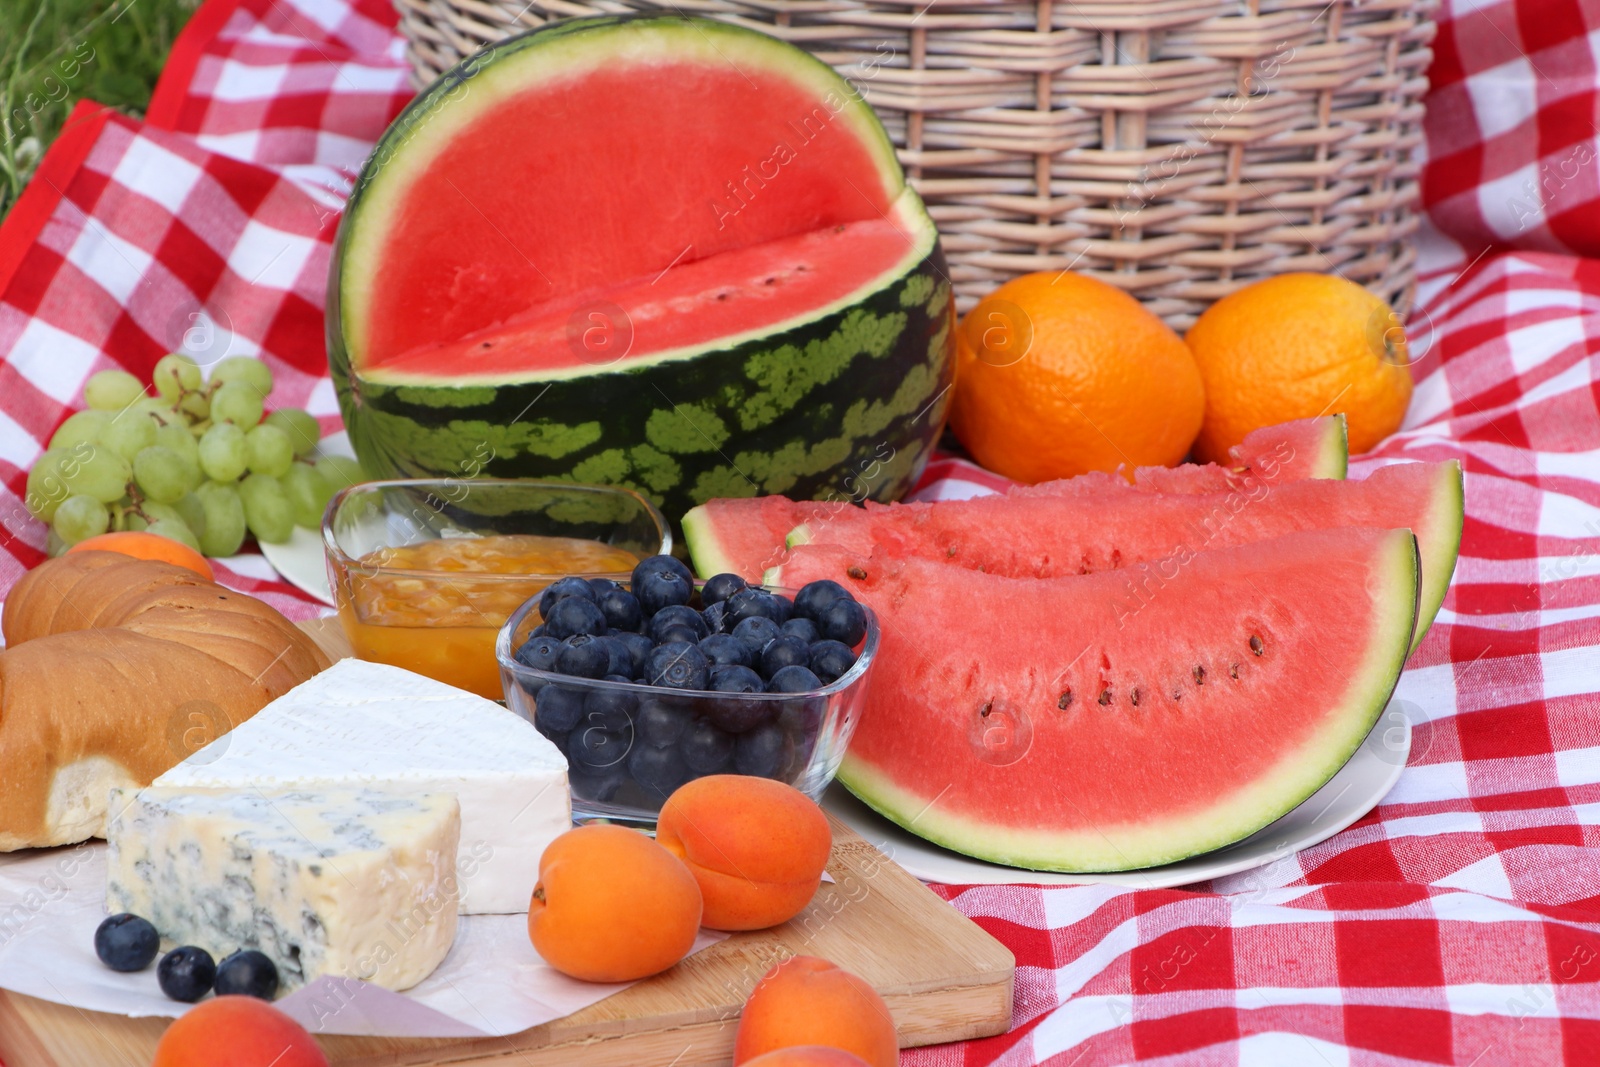 Photo of Picnic blanket with delicious food outdoors on summer day